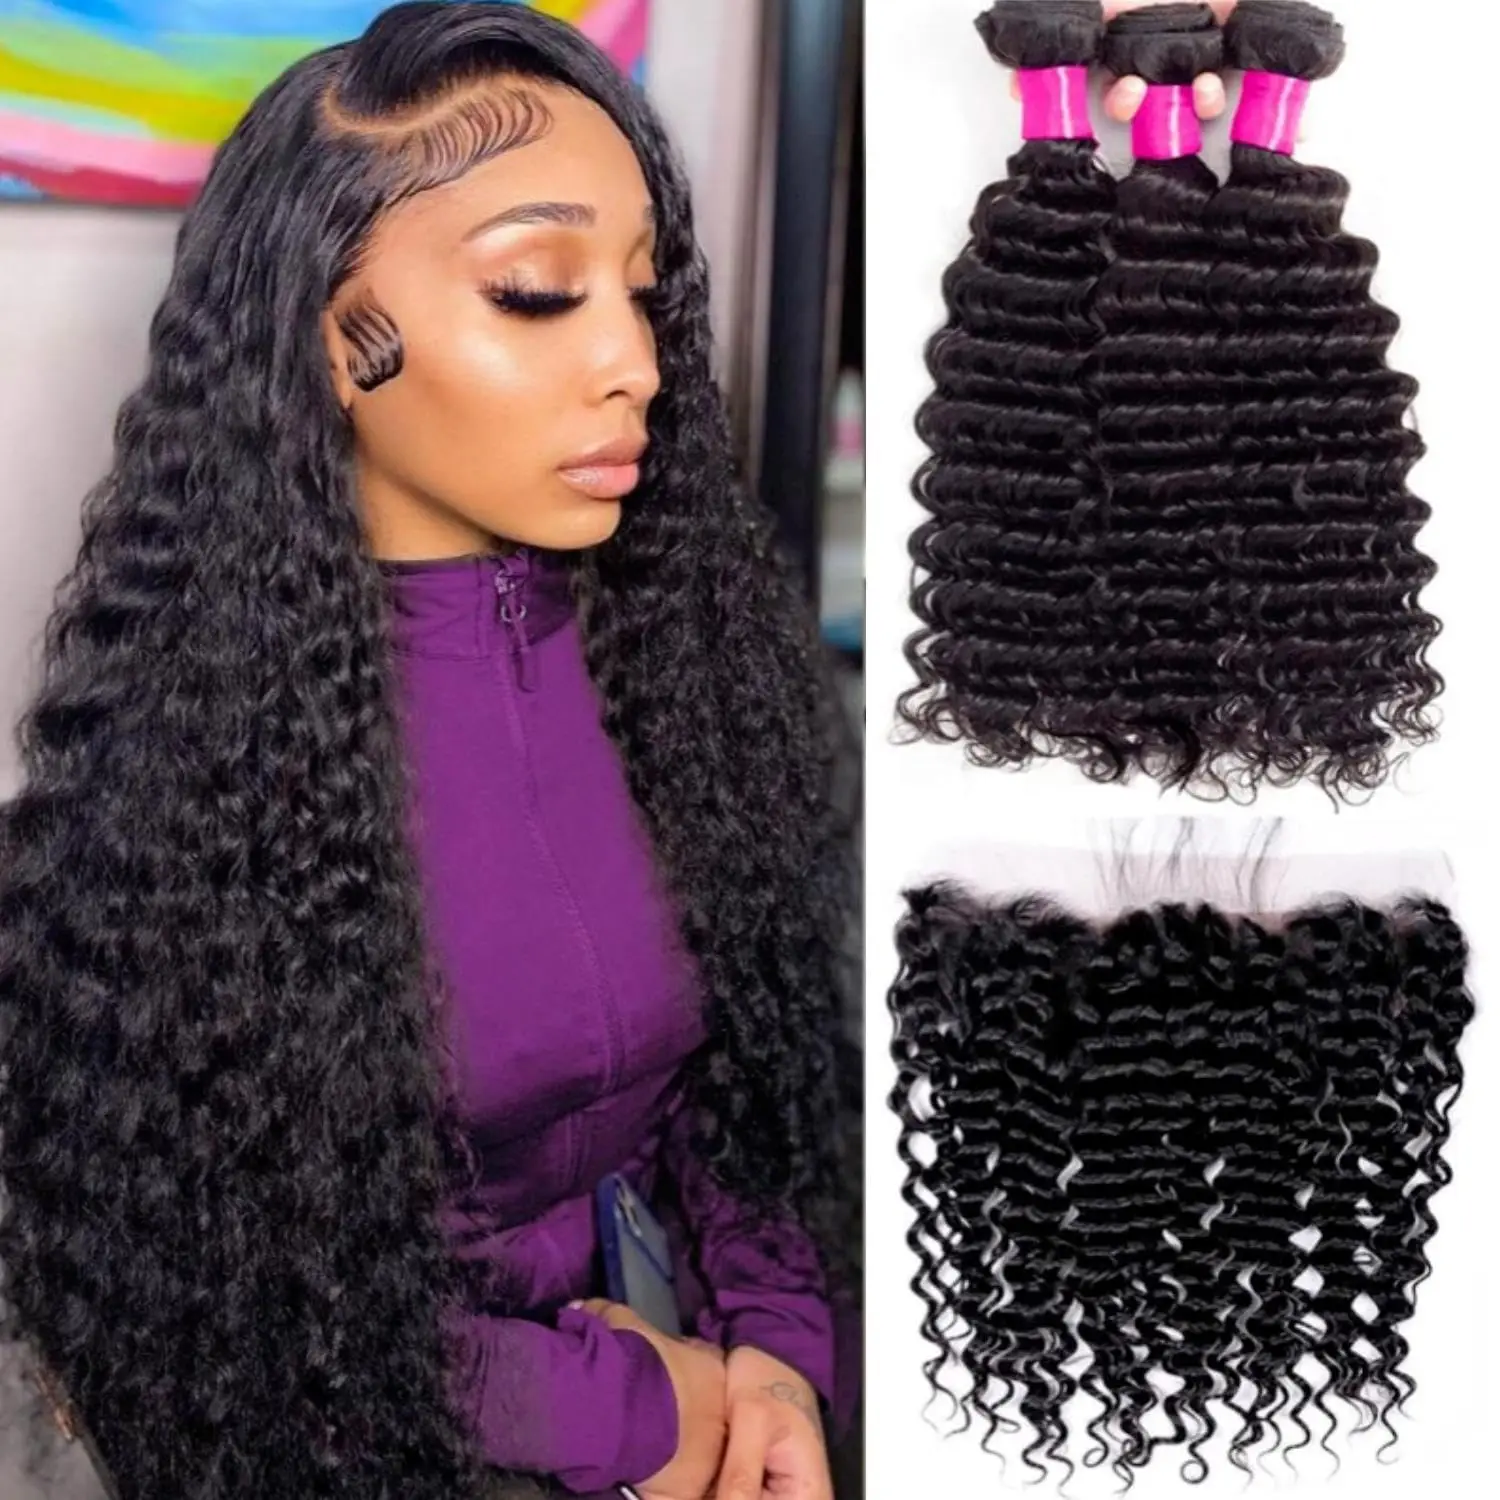 

Peruvian Human Hair Deep Wave Bundles with Frontal Ear to Ear 13x4 Free Part Lace Frontal 100% Unprocessed Virgin Human Hair